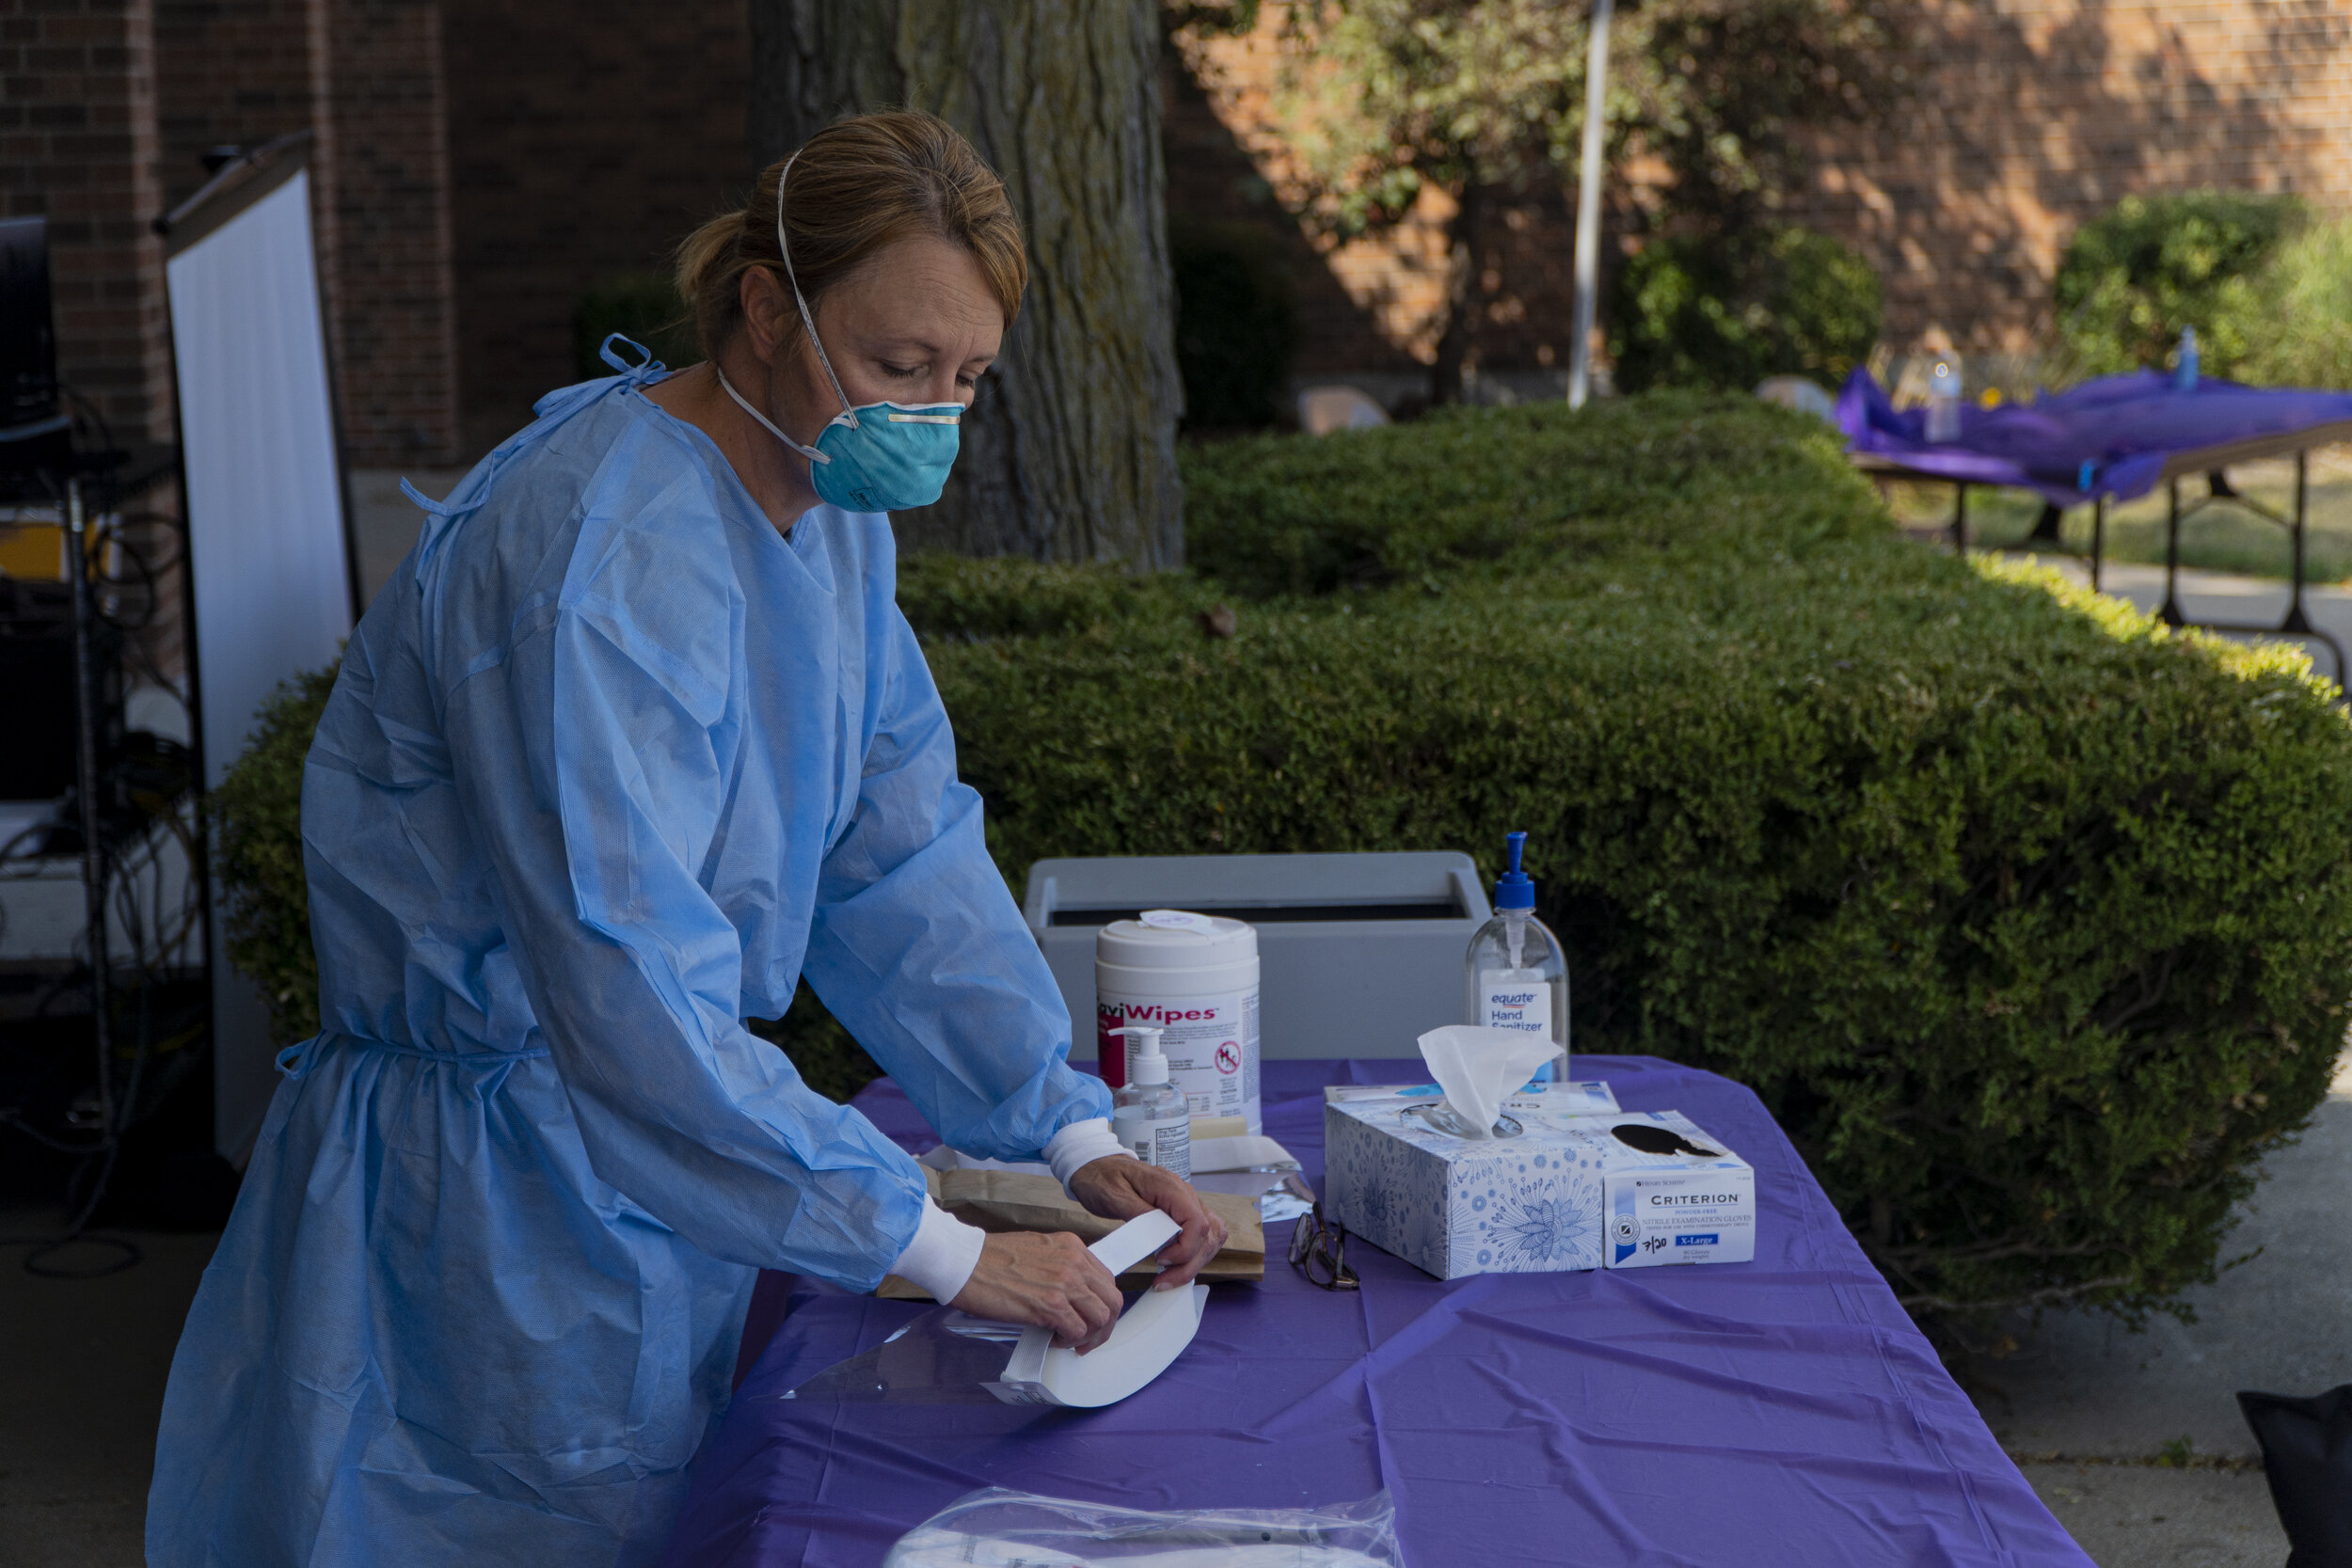 Claire Palmer with Health Services prepares for COVID tests as students arrive to campus. (Rob Nguyen/TKS)